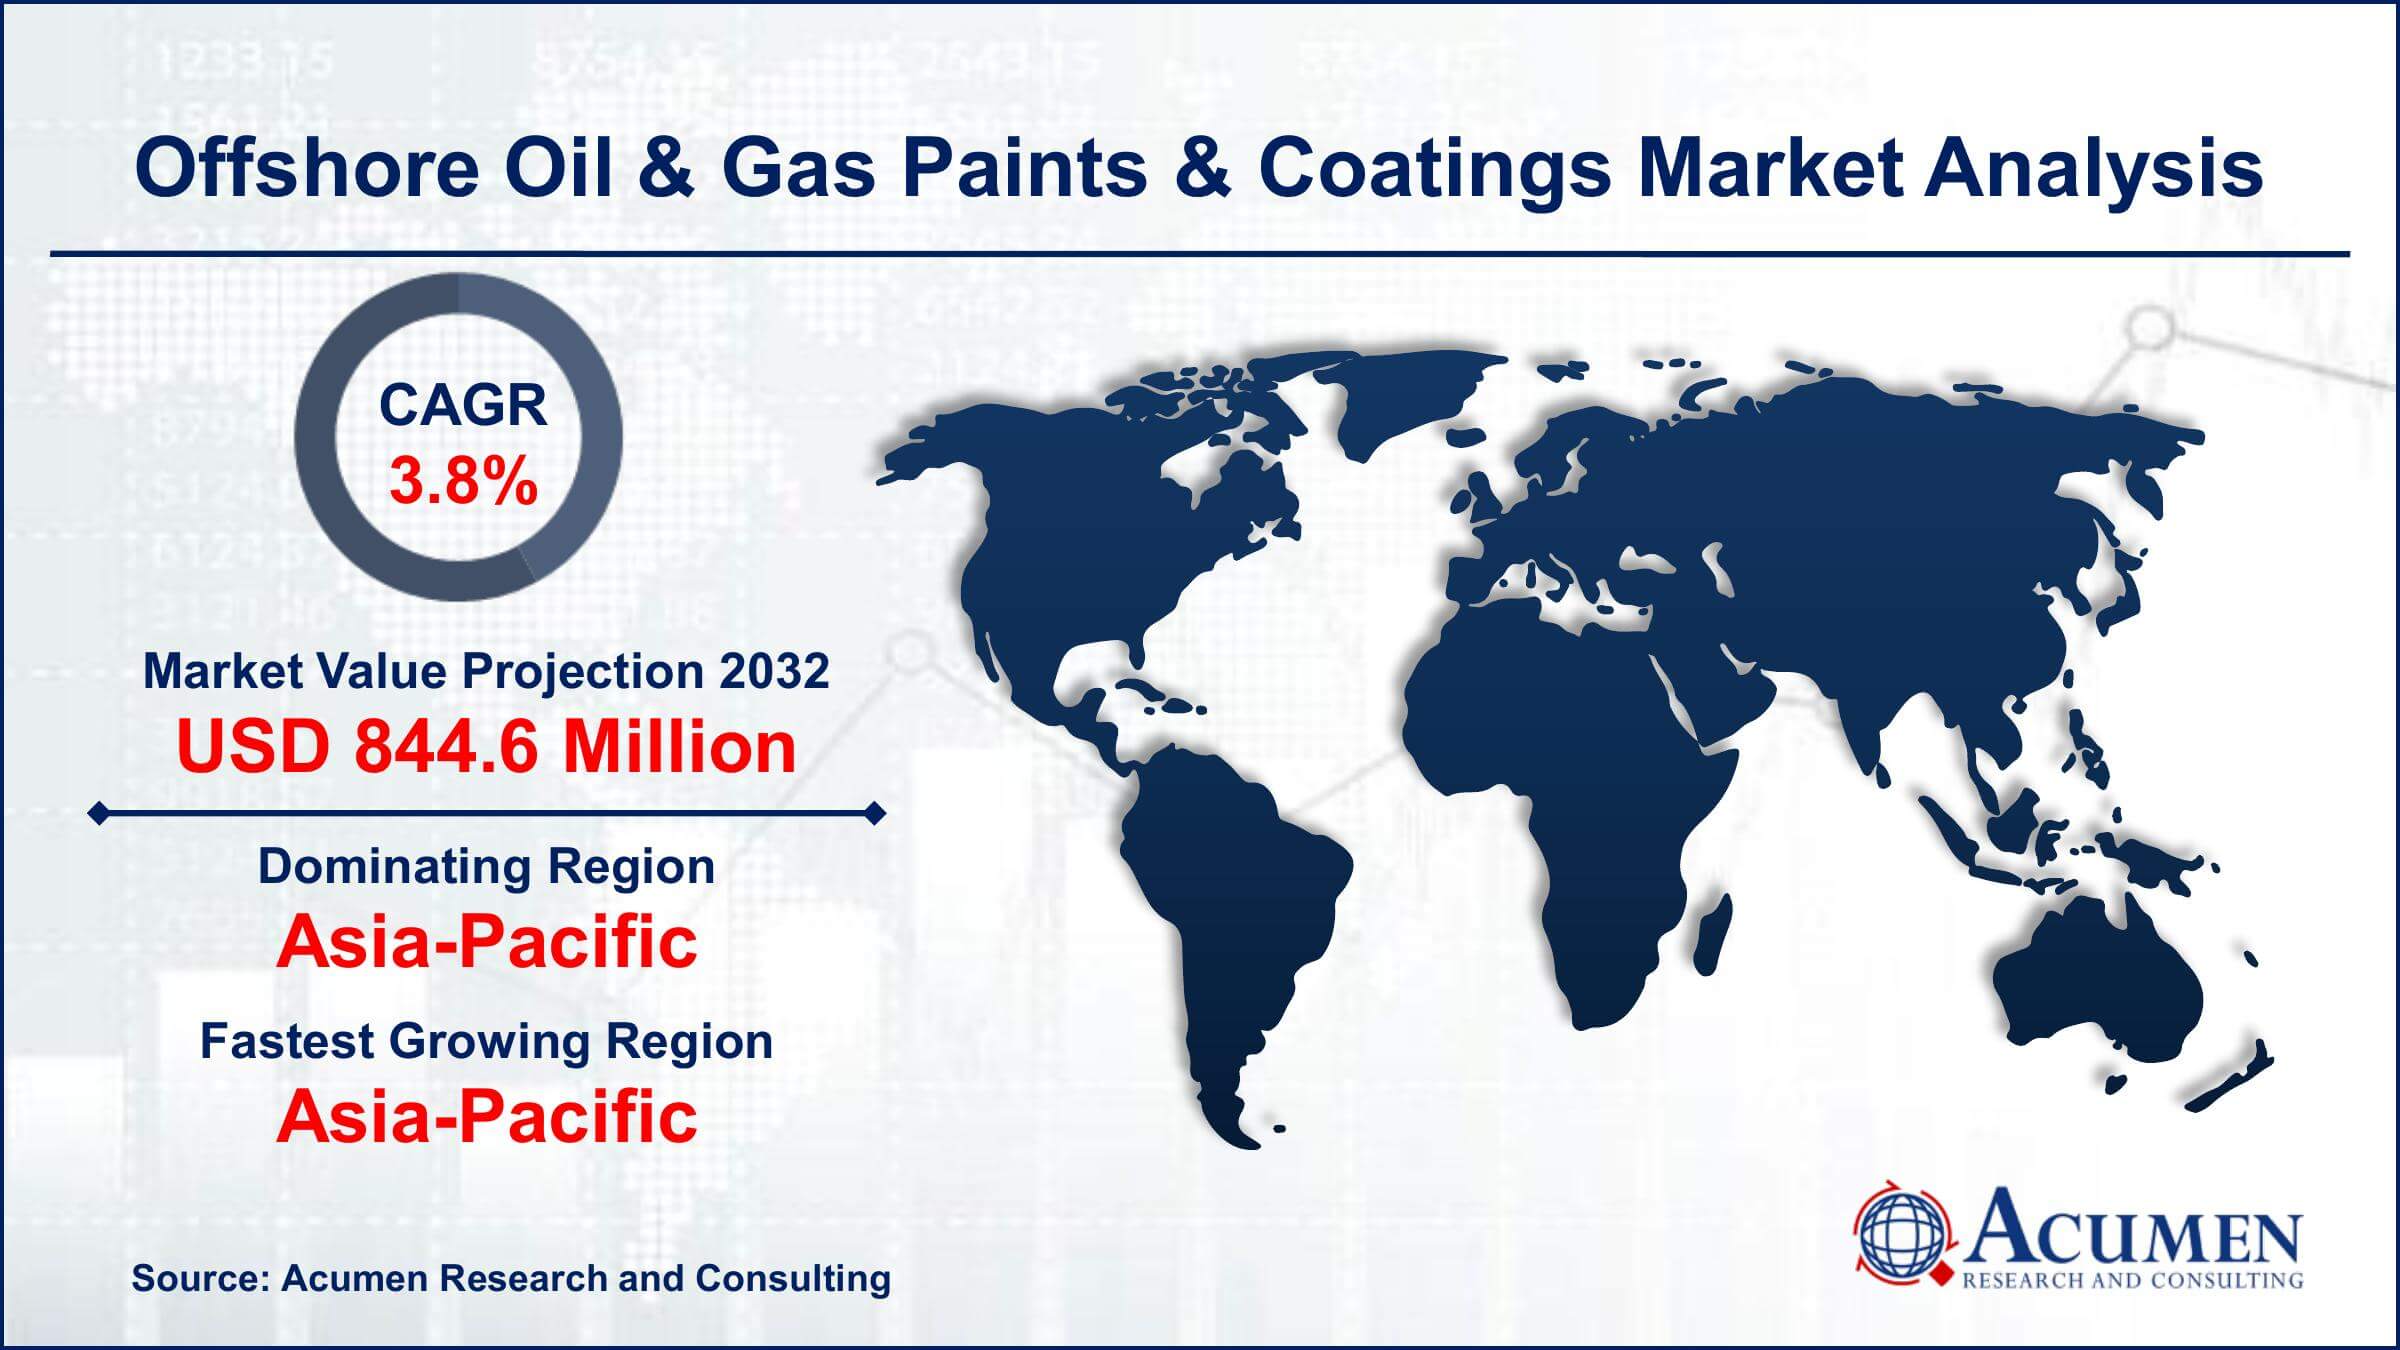 Global Offshore Oil & Gas Paints & Coatings Market Trends